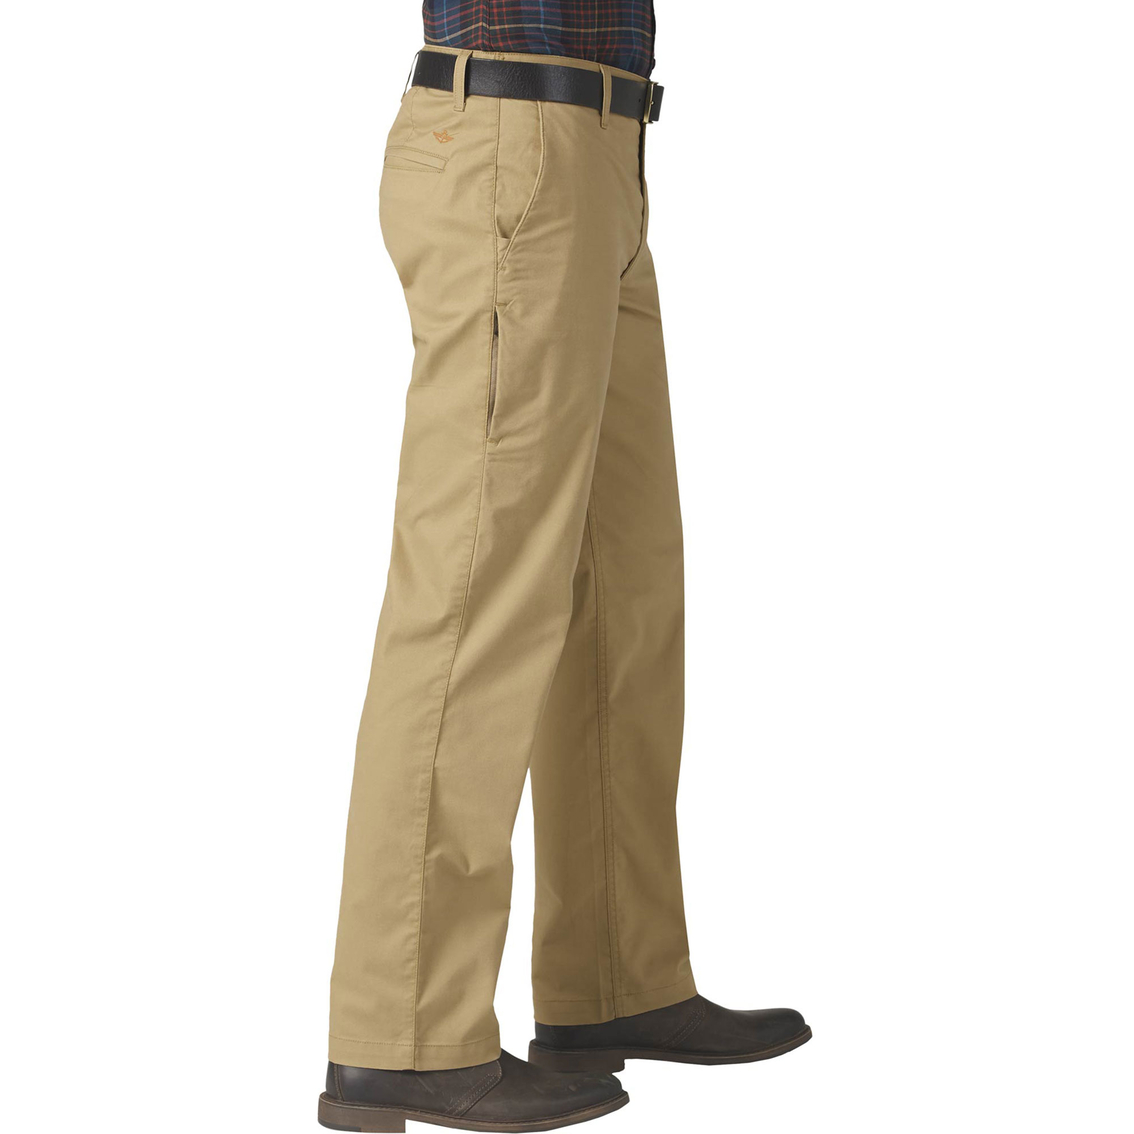 Dockers Big & Tall Pacific On The Go Flat Front Pants - Image 2 of 3